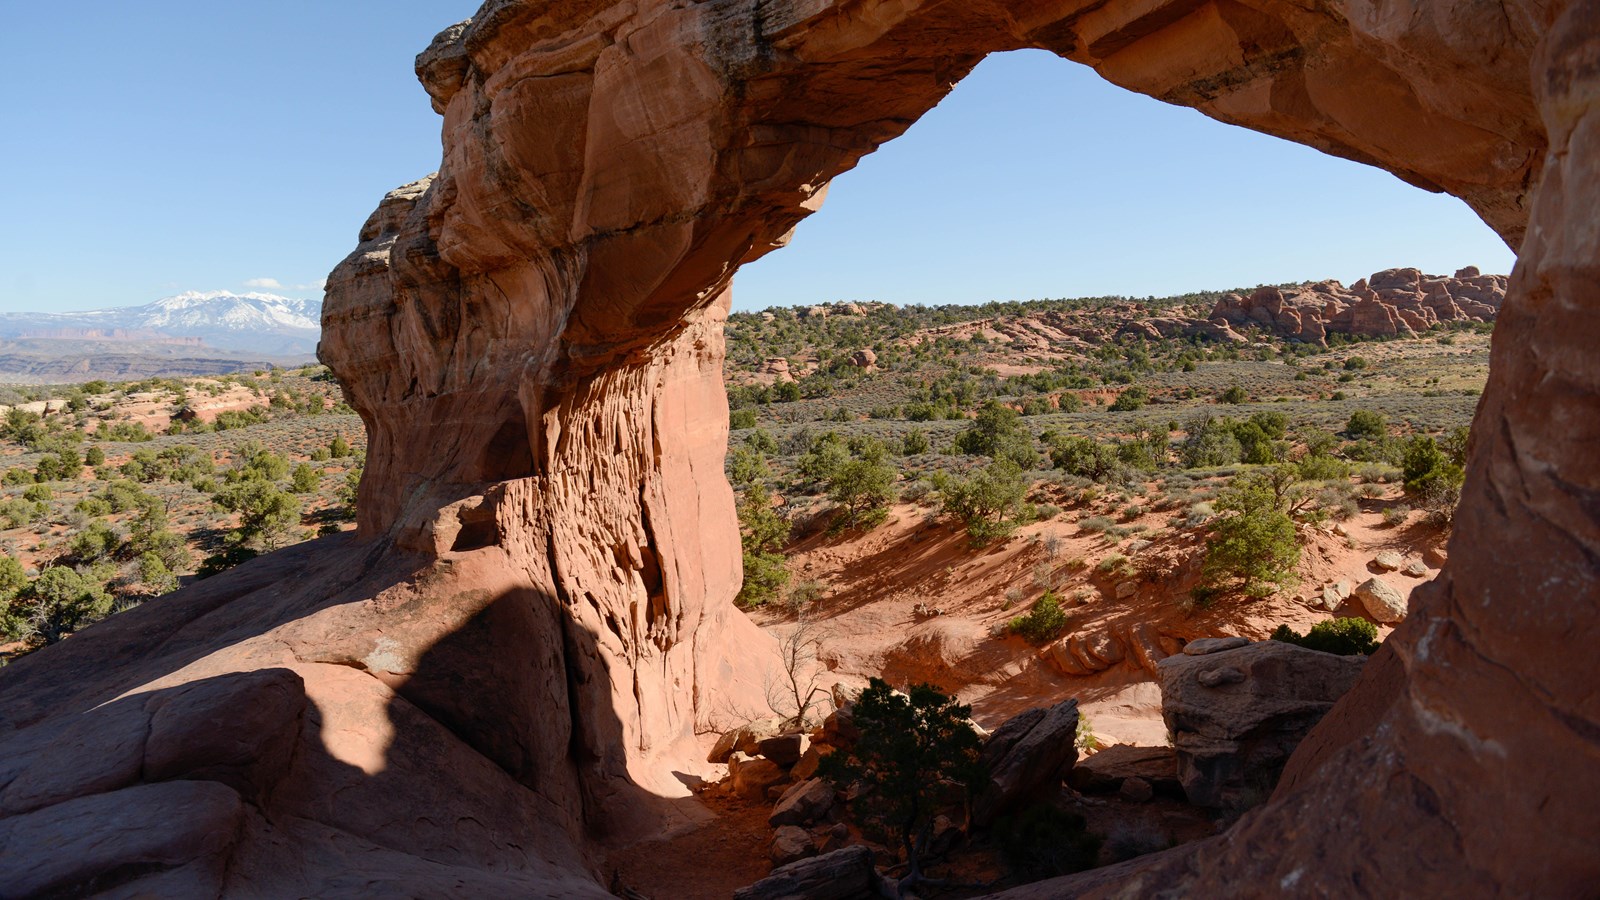 A stone arch frames a view of the landscape below